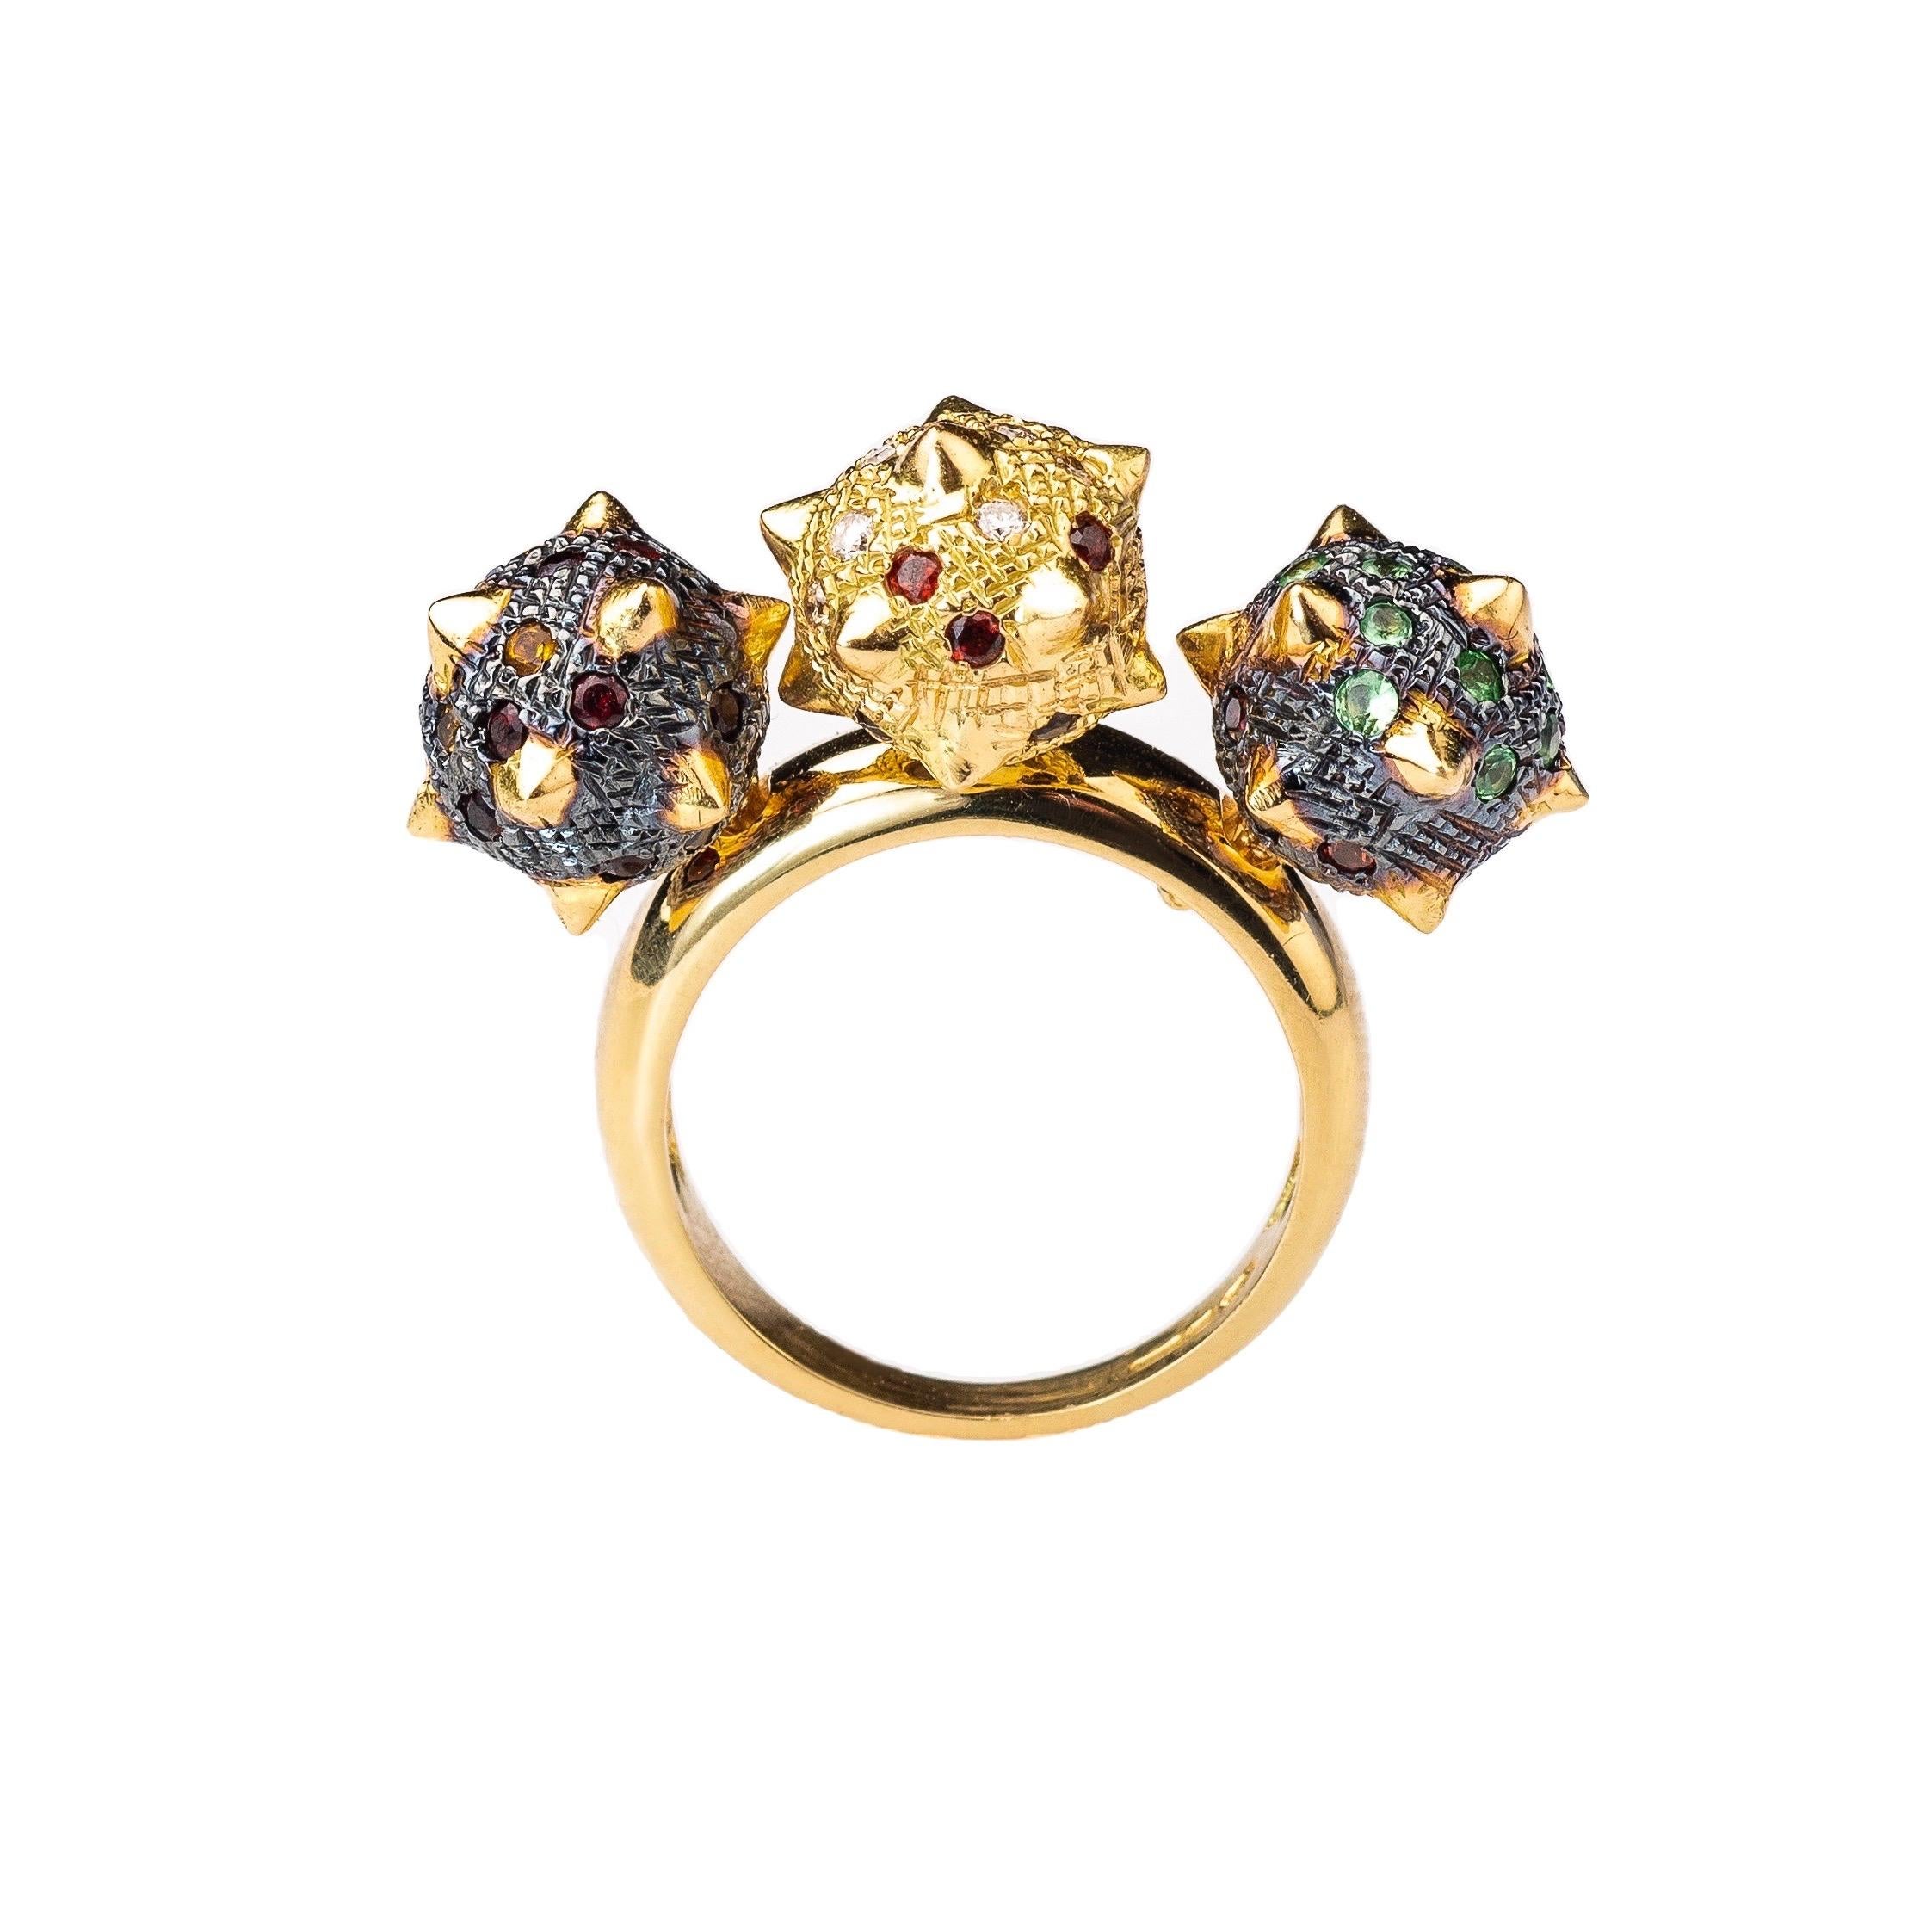 The ‘Rocking Morning Star’, ring is crafted in 18k yellow and blackened gold hallmarked in Cyprus. This impressive, statement ring consists of three individual morning star, spheres fixed on a half round band, in a way that allows a discreet rocking